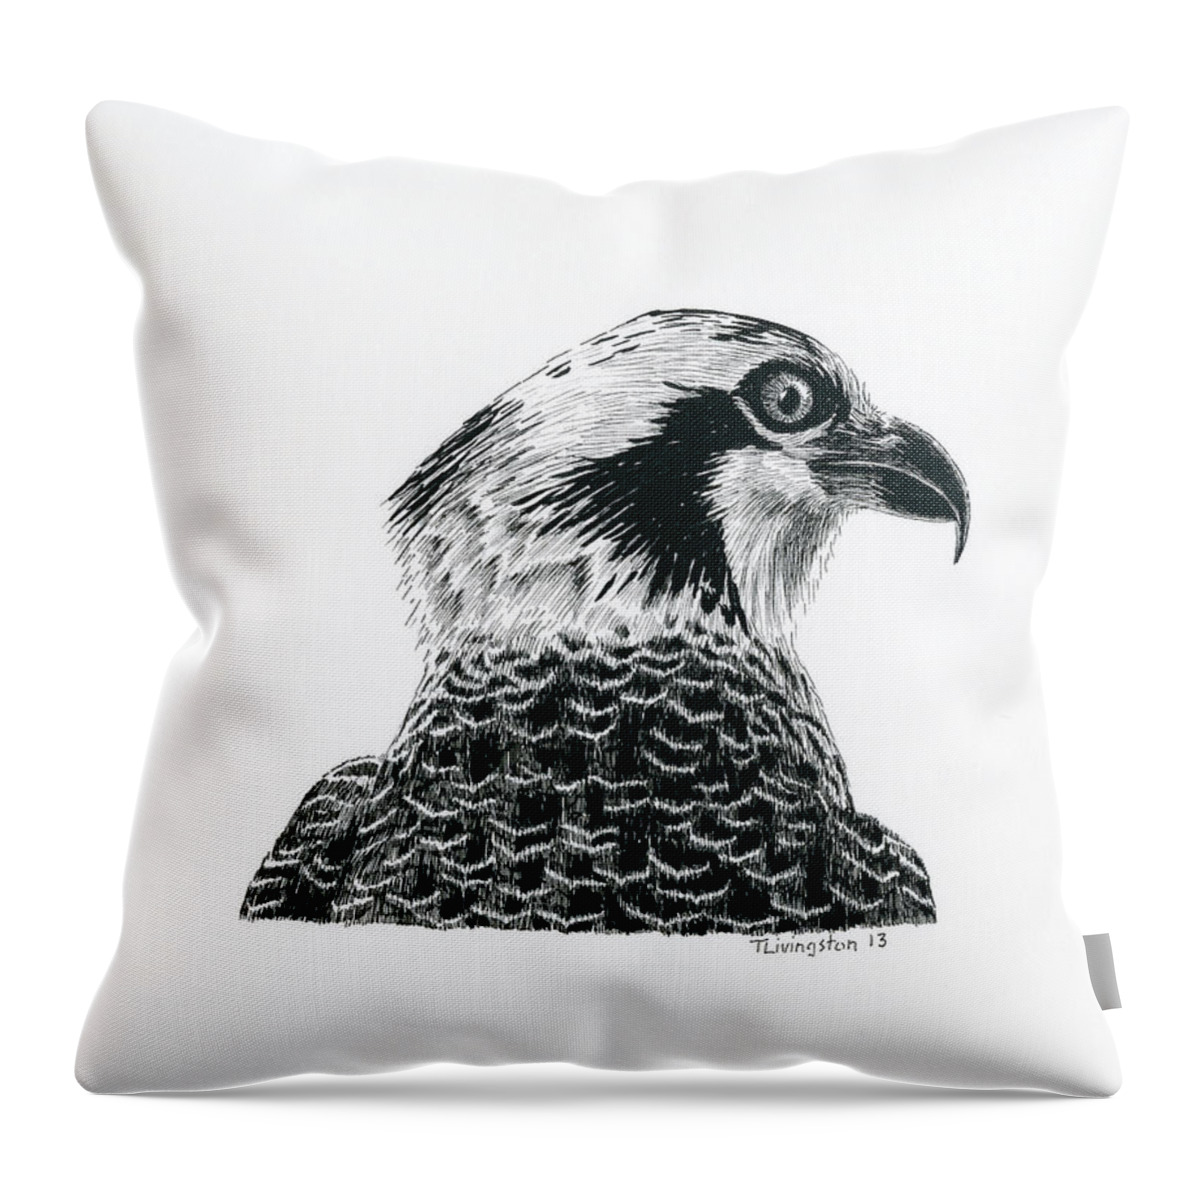 Osprey Throw Pillow featuring the drawing Osprey Portrait by Timothy Livingston